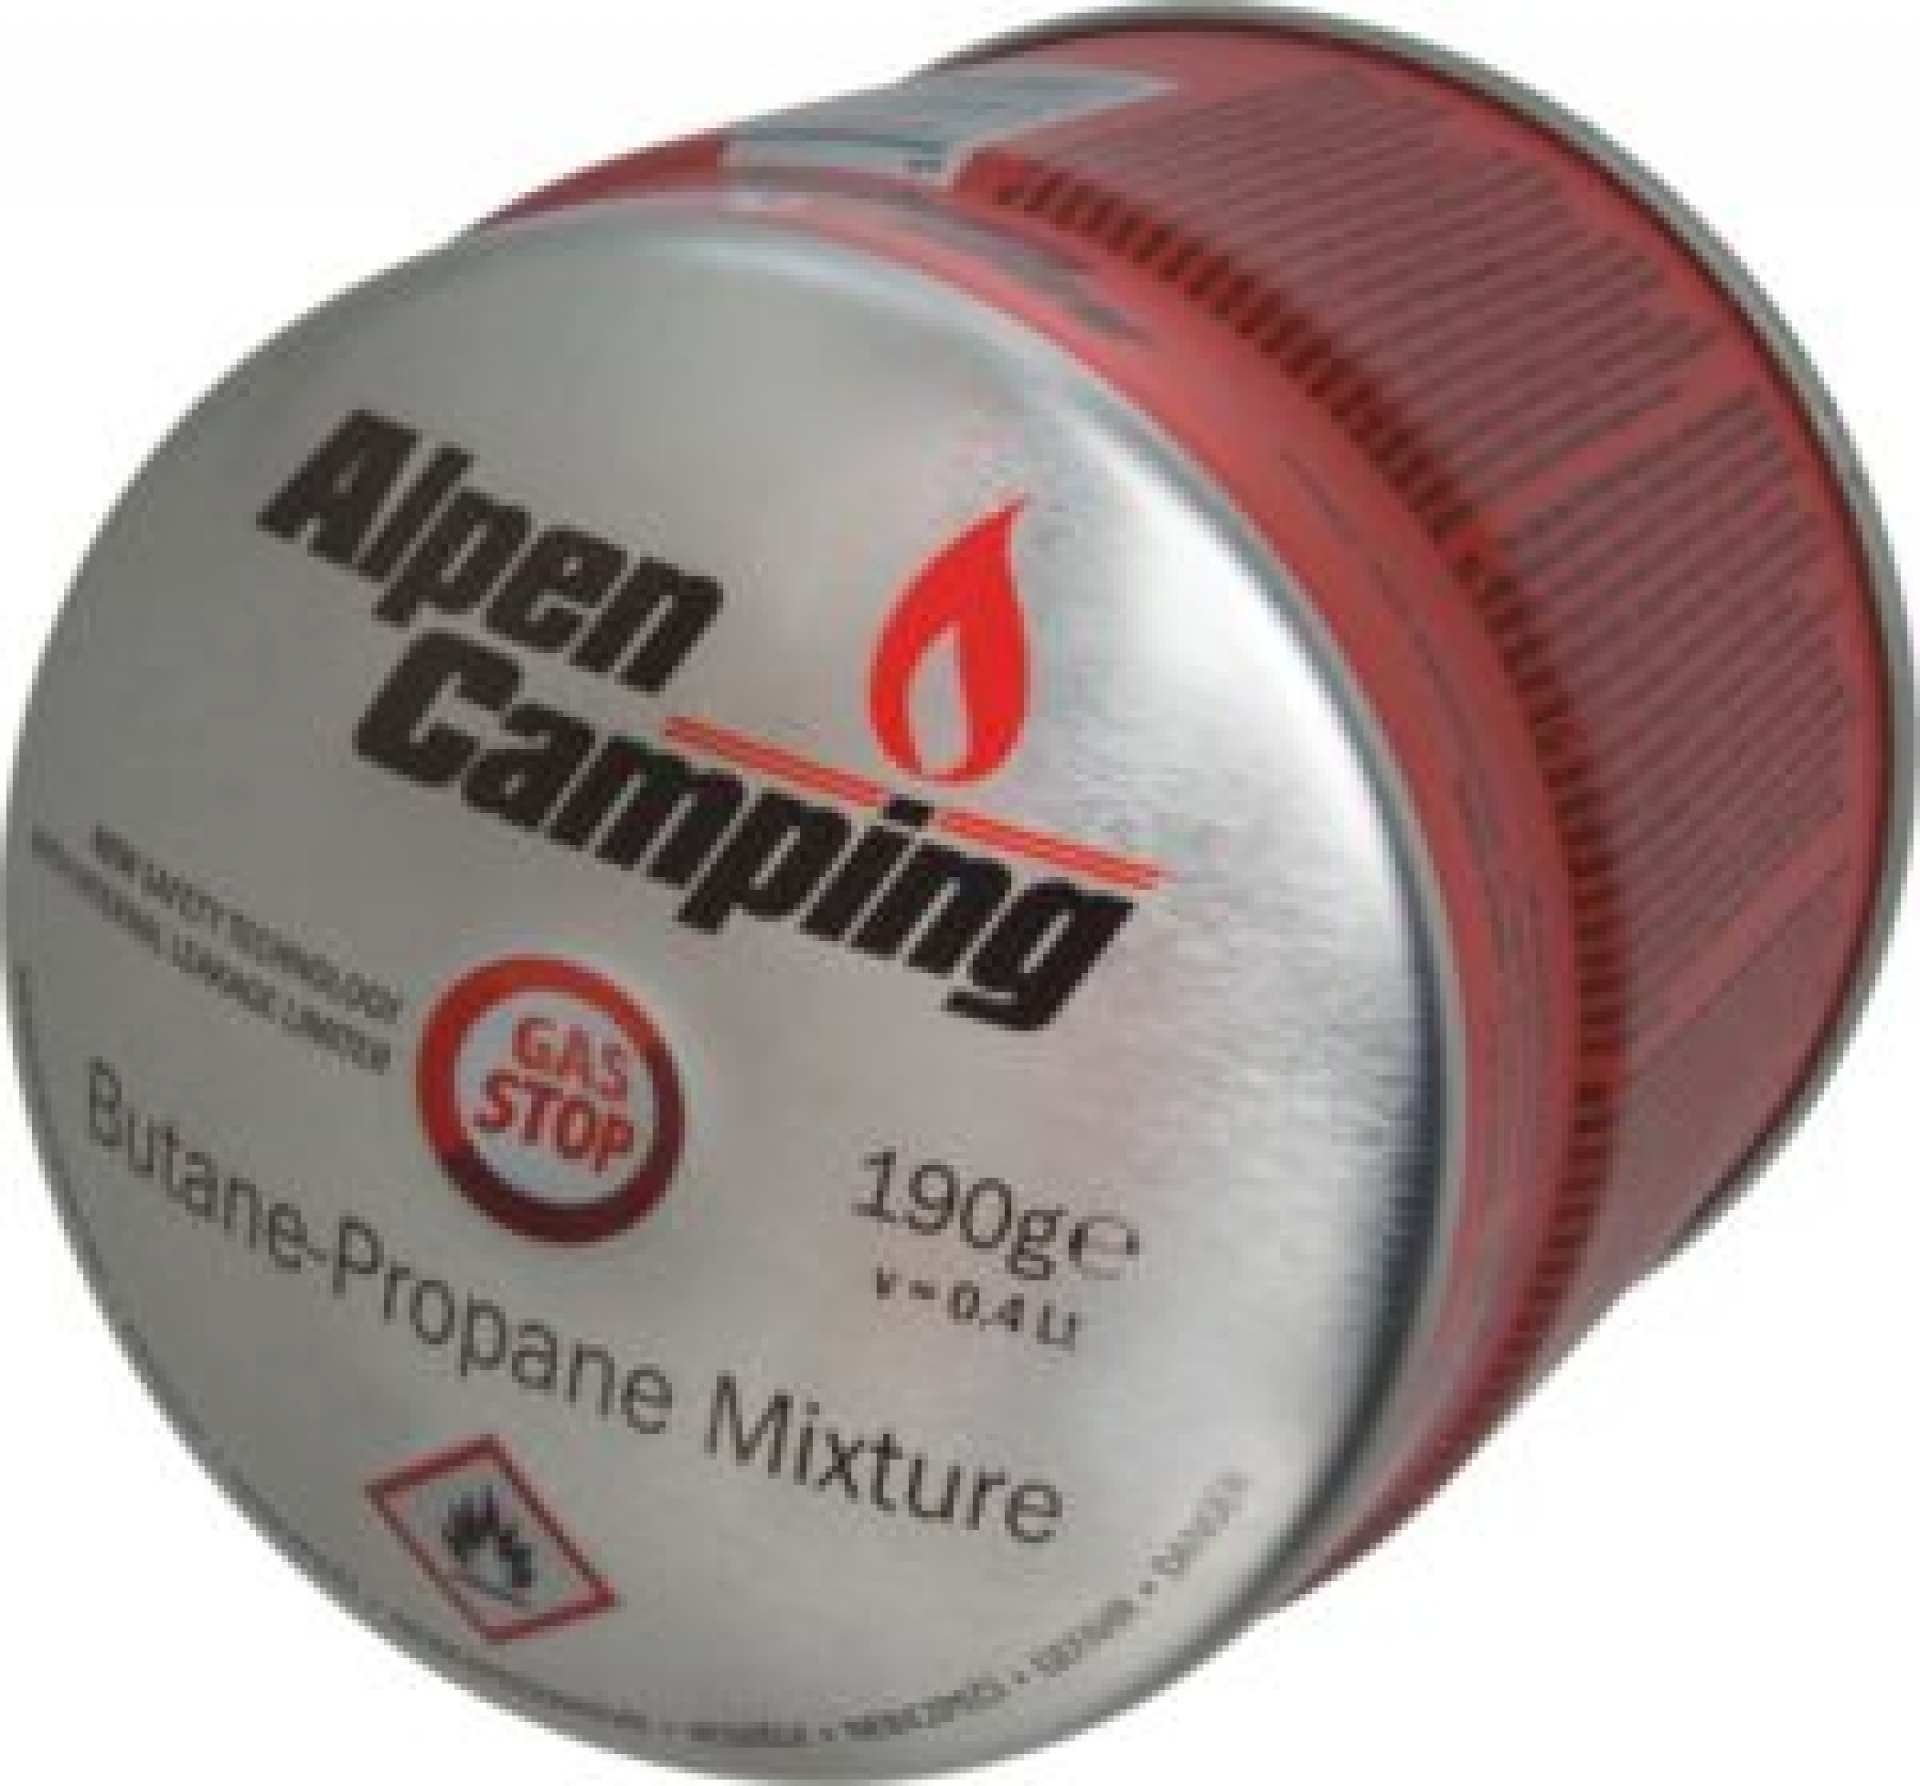 Alpen Camping - Piercable Gas Cartridge Type 200 / 190g